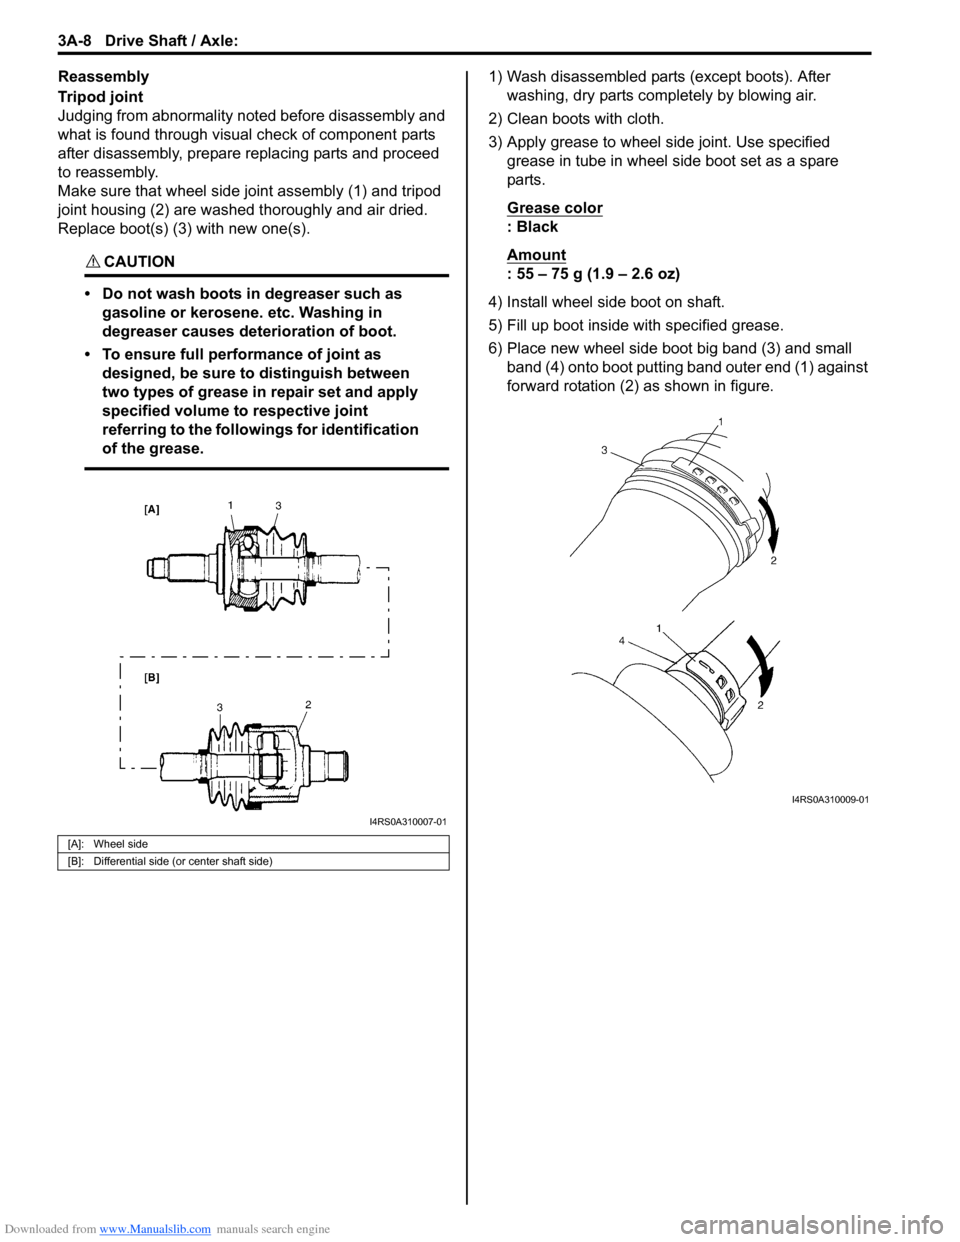 SUZUKI SWIFT 2005 2.G Service Repair Manual Downloaded from www.Manualslib.com manuals search engine 3A-8 Drive Shaft / Axle: 
Reassembly
Tripod joint
Judging from abnormality noted before disassembly and 
what is found through visual check of 